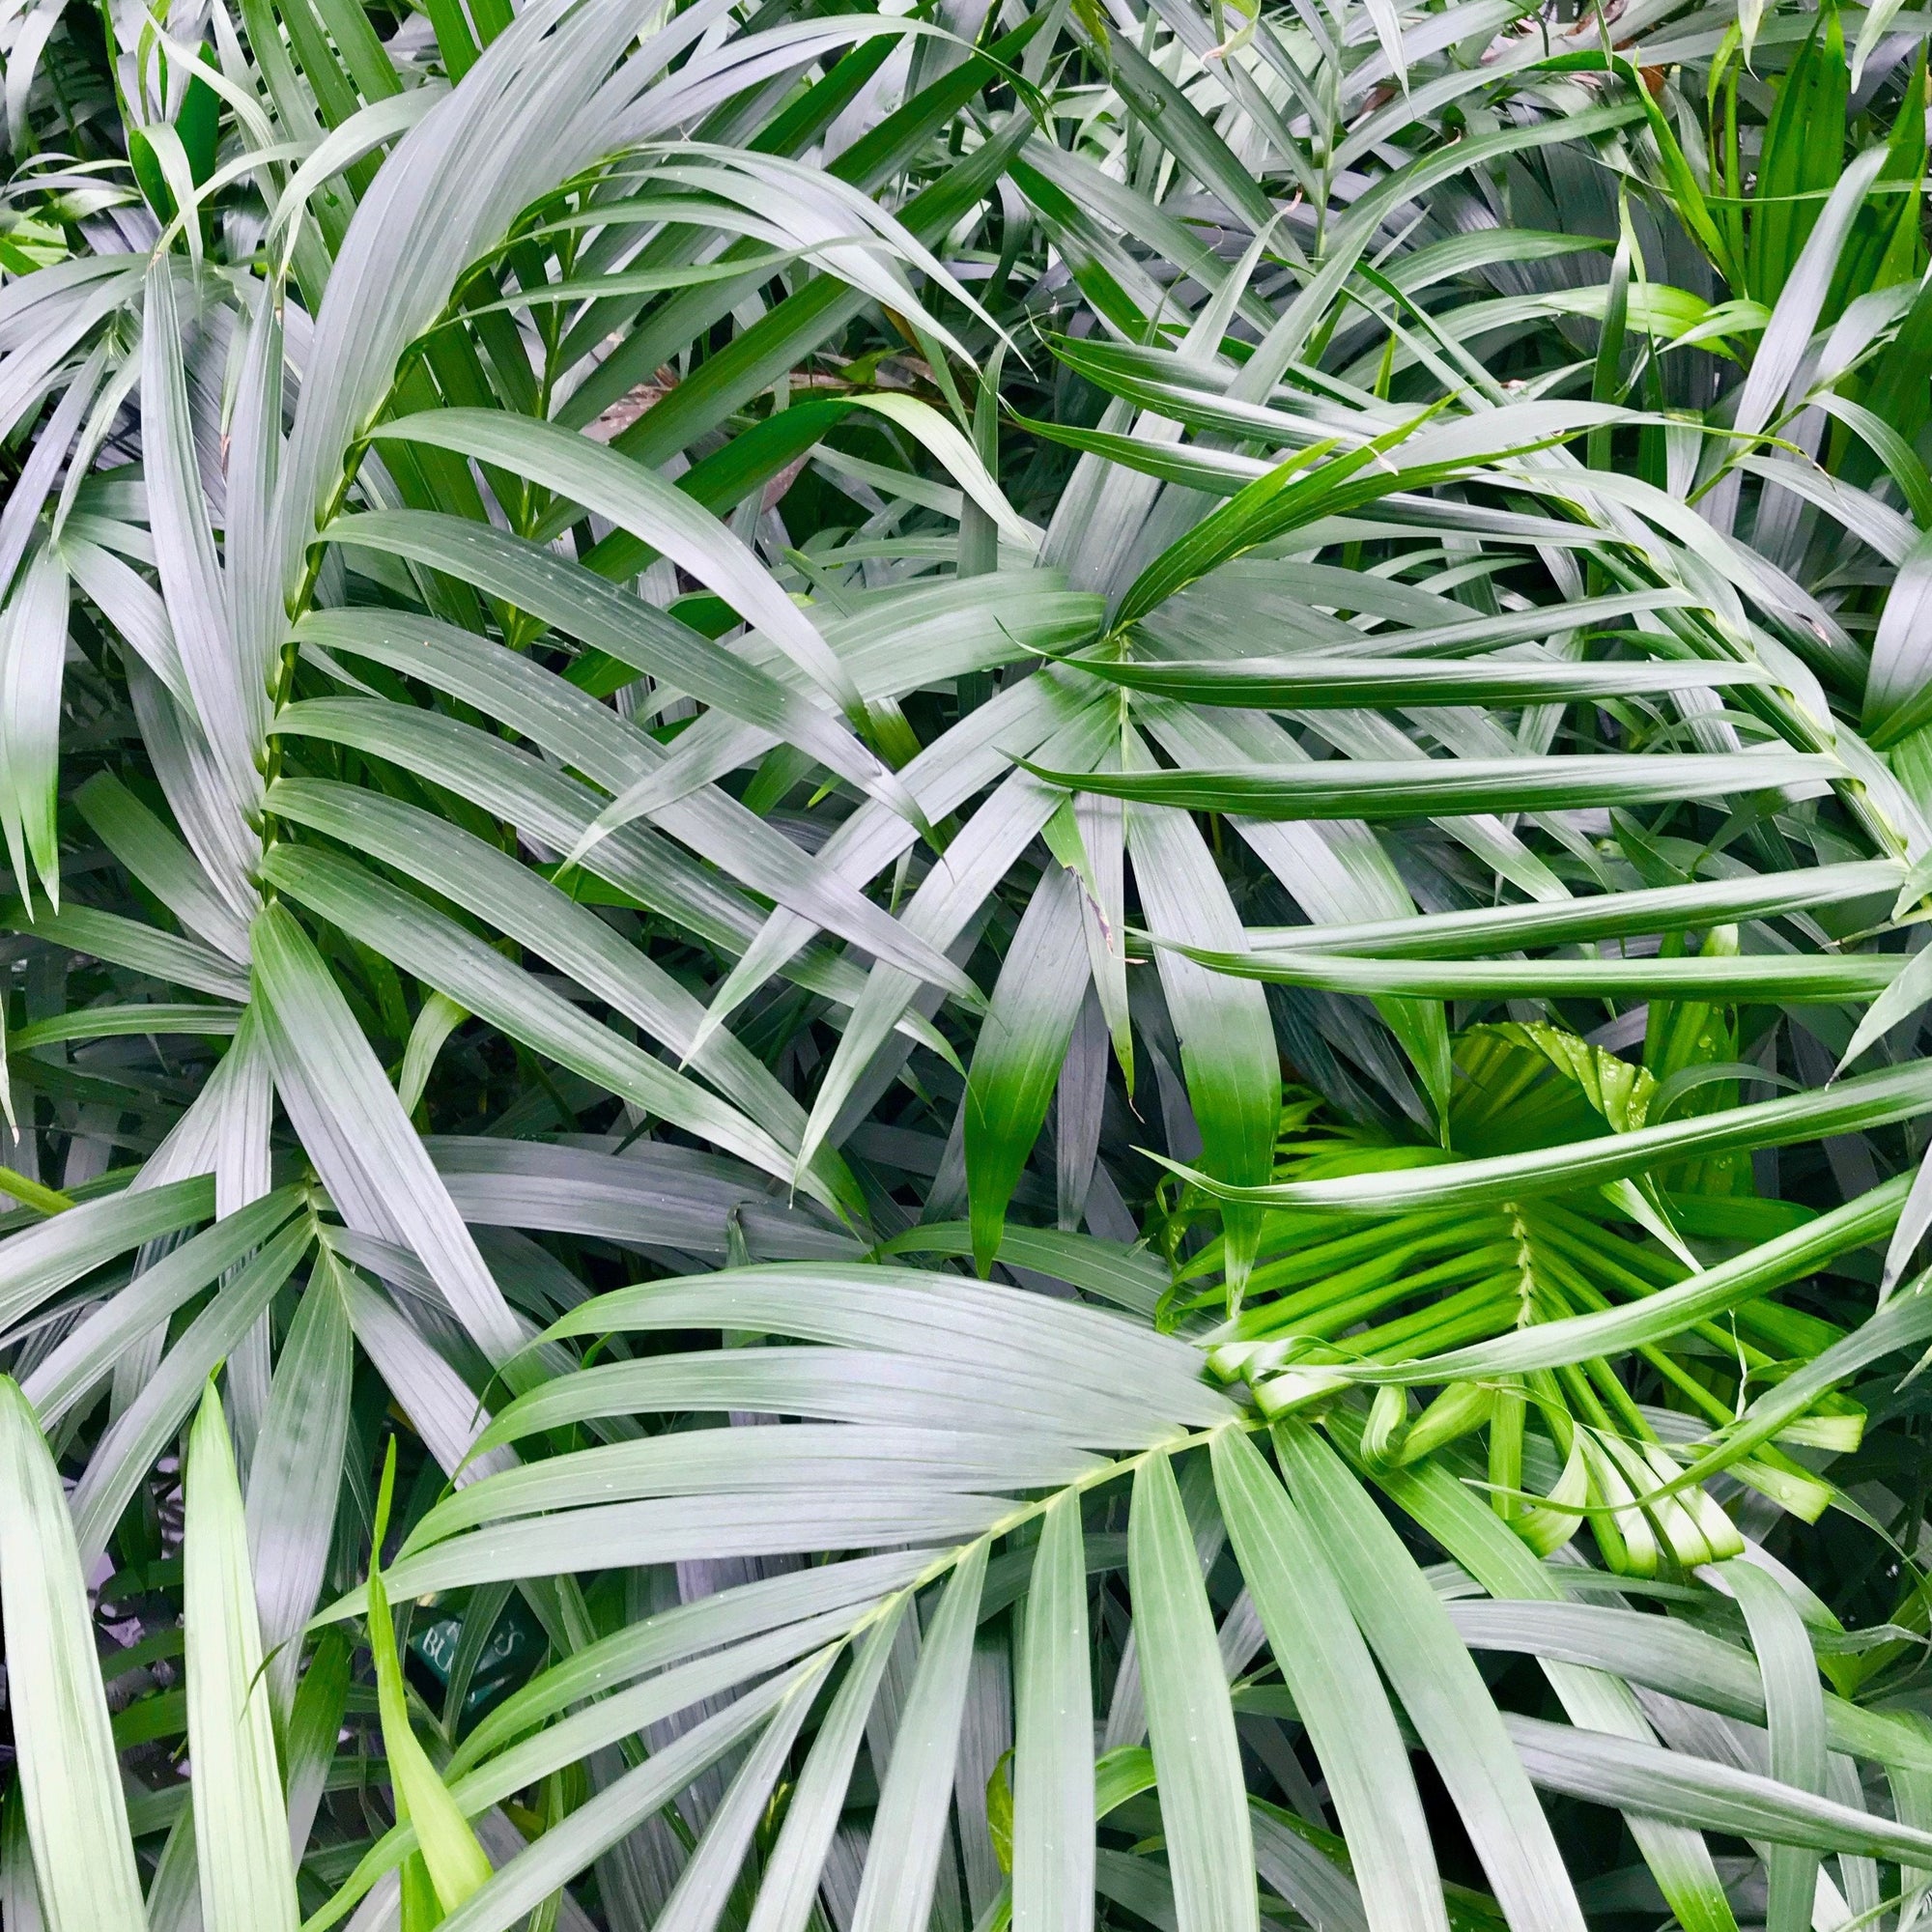 Chamaedorea antrivens is also known as the Mexican Hat Palm, this gorgeous palm is well suited for indoors